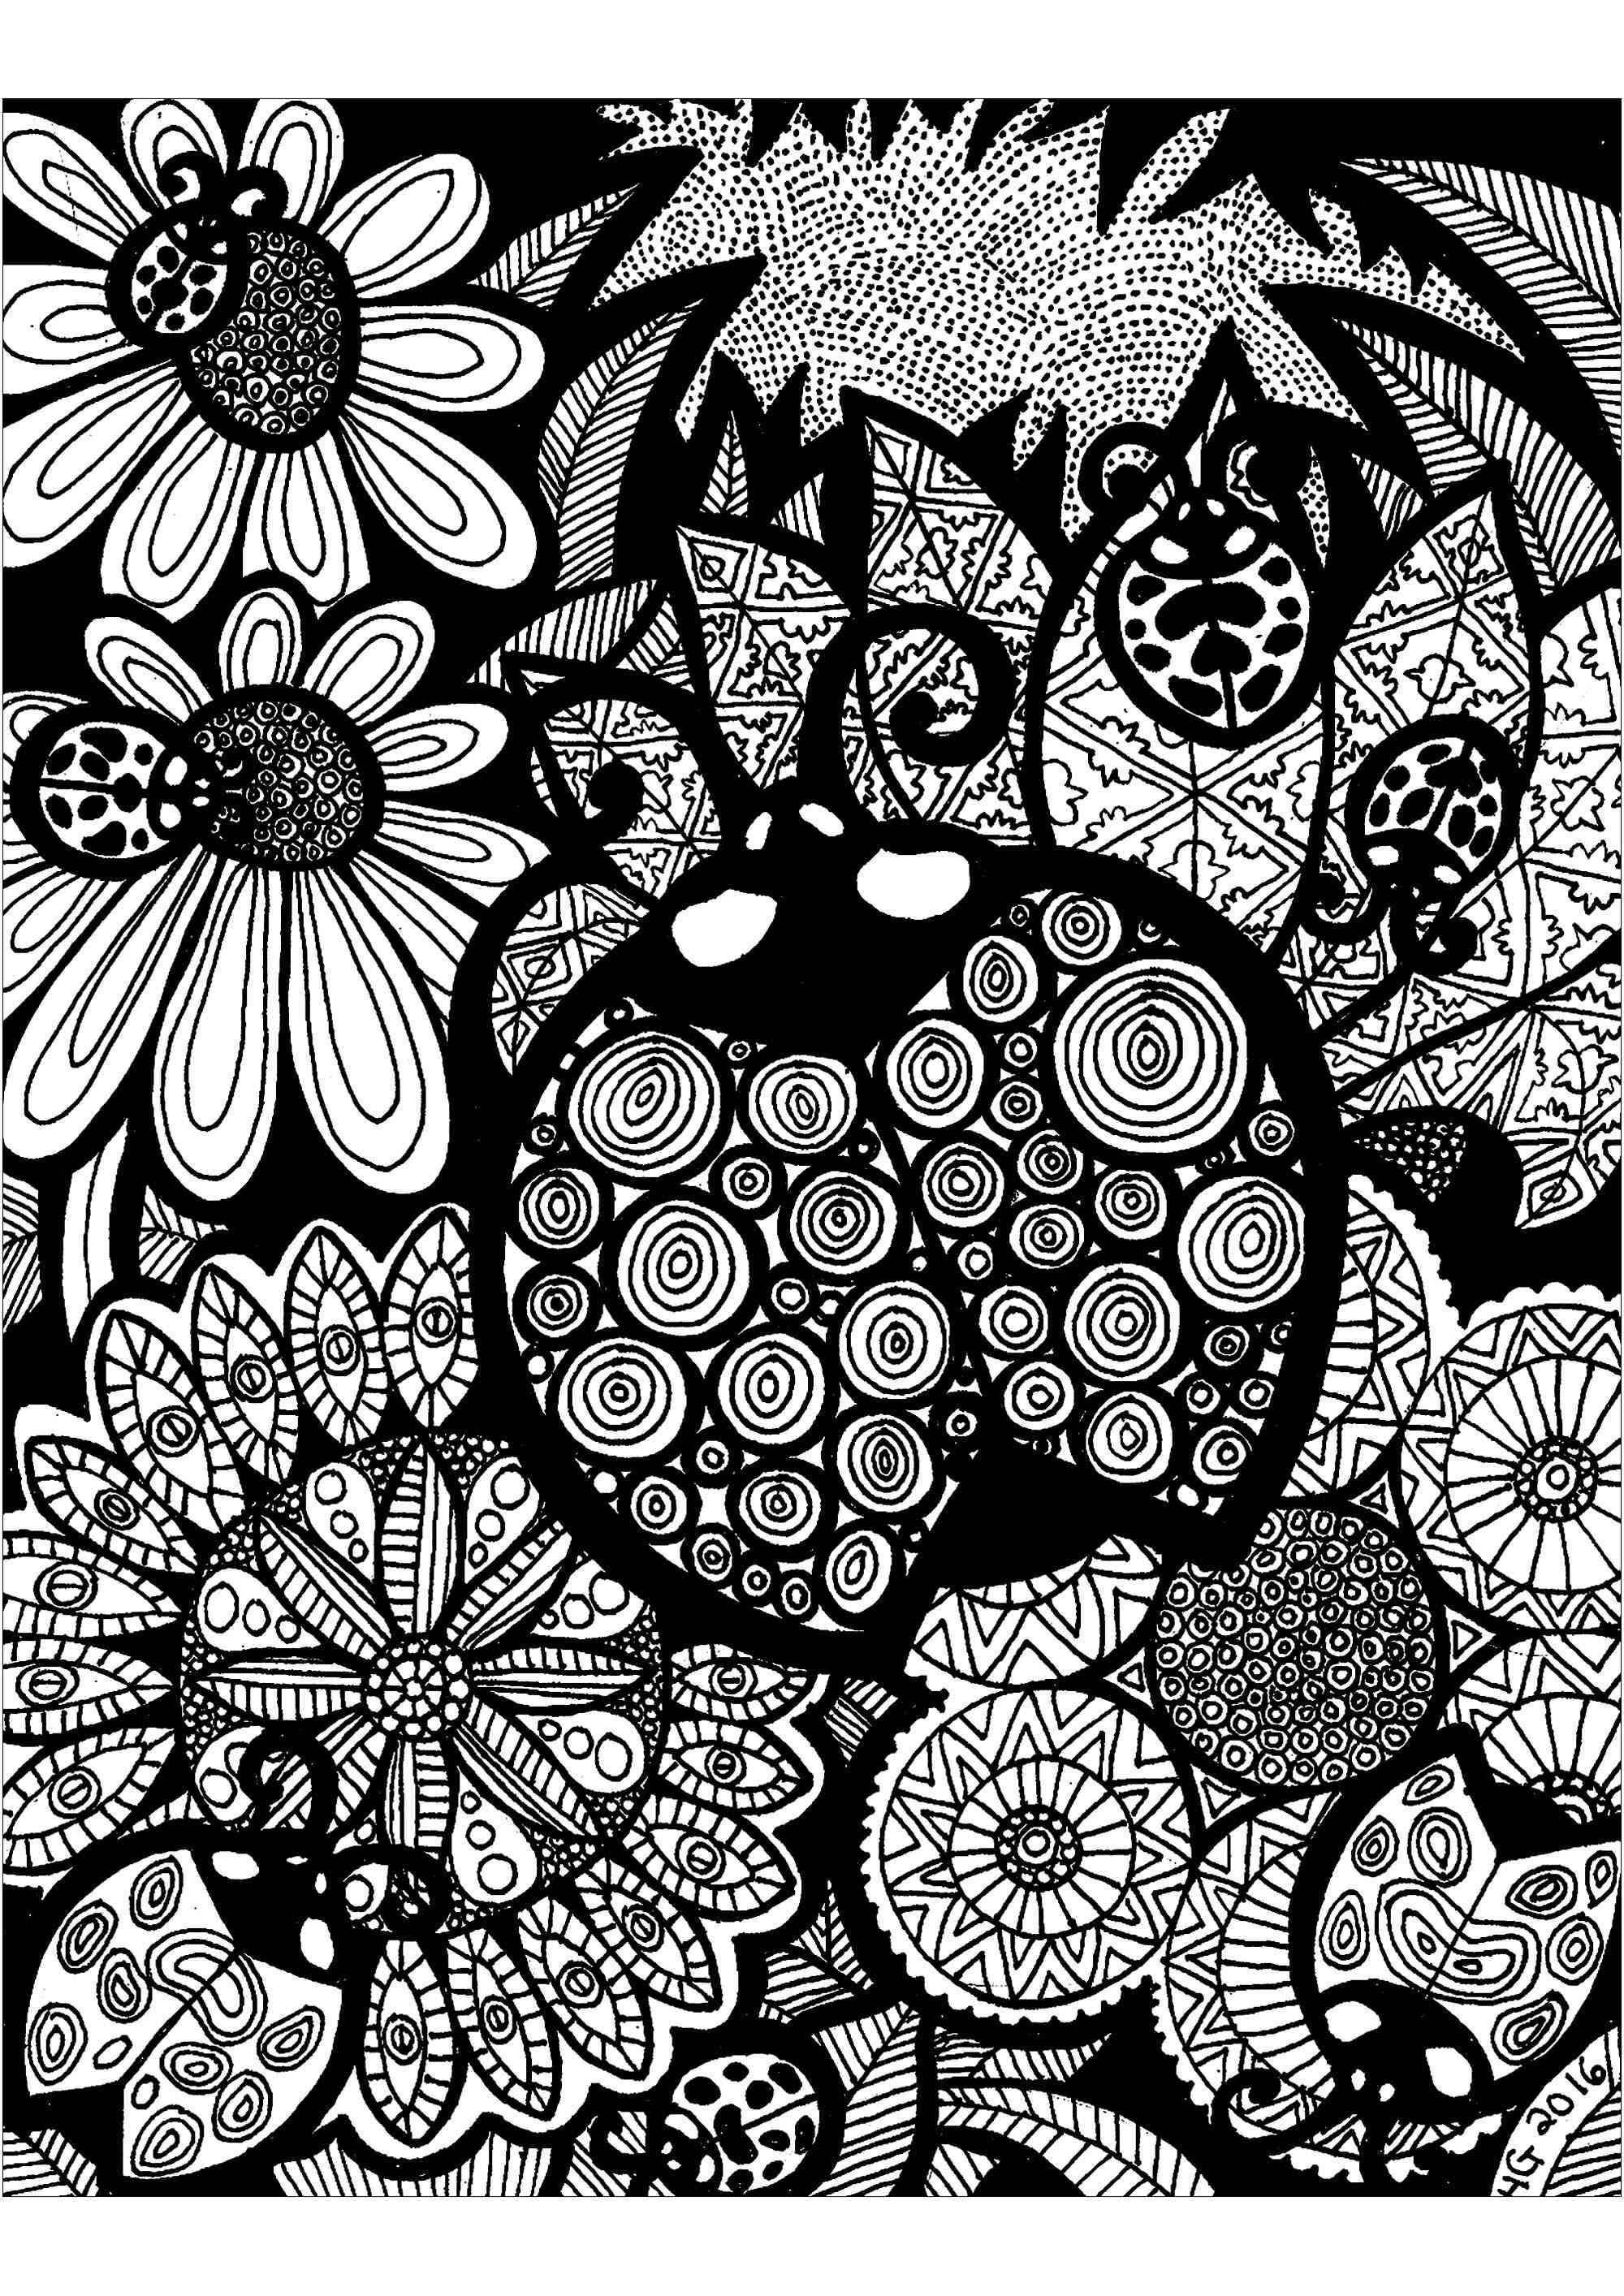 Ladybug coloring pages for Adults Free Download and Print